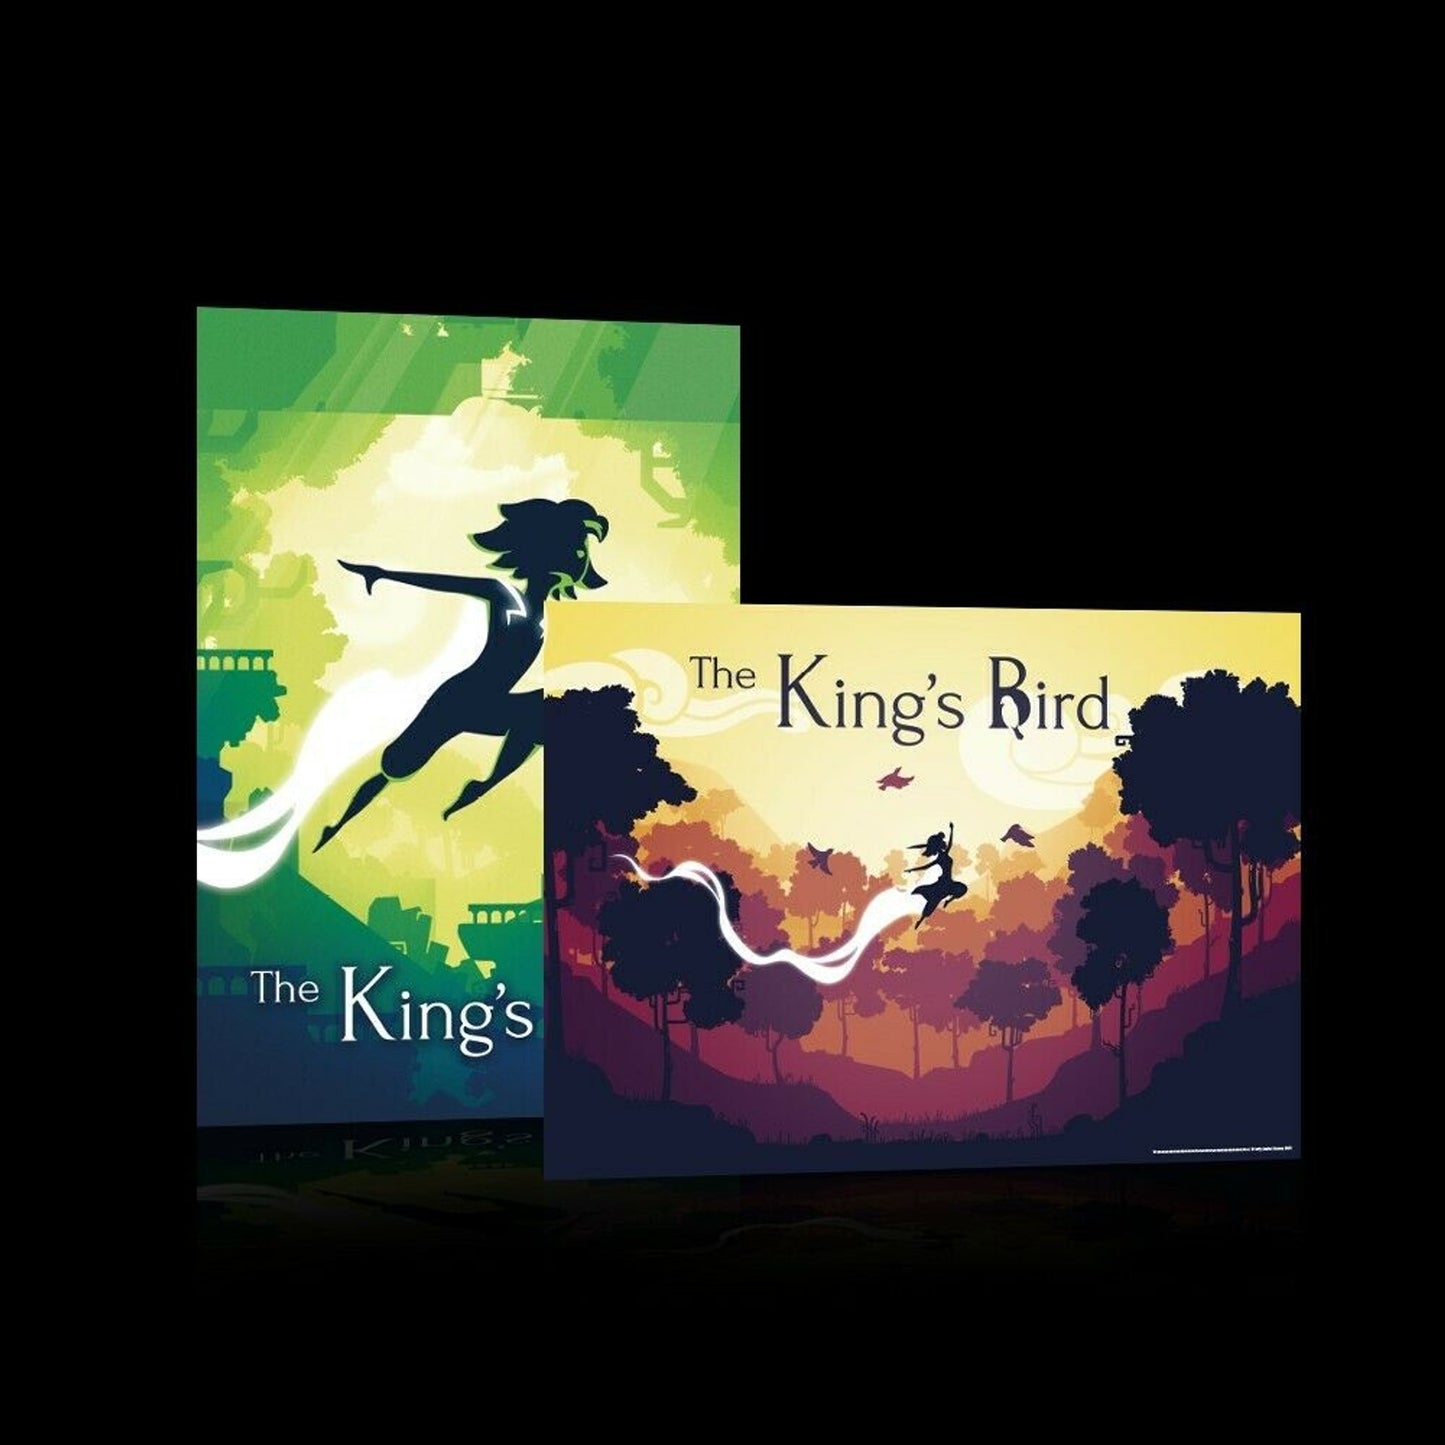 The King's Bird Special Limited Edition Playstation 4